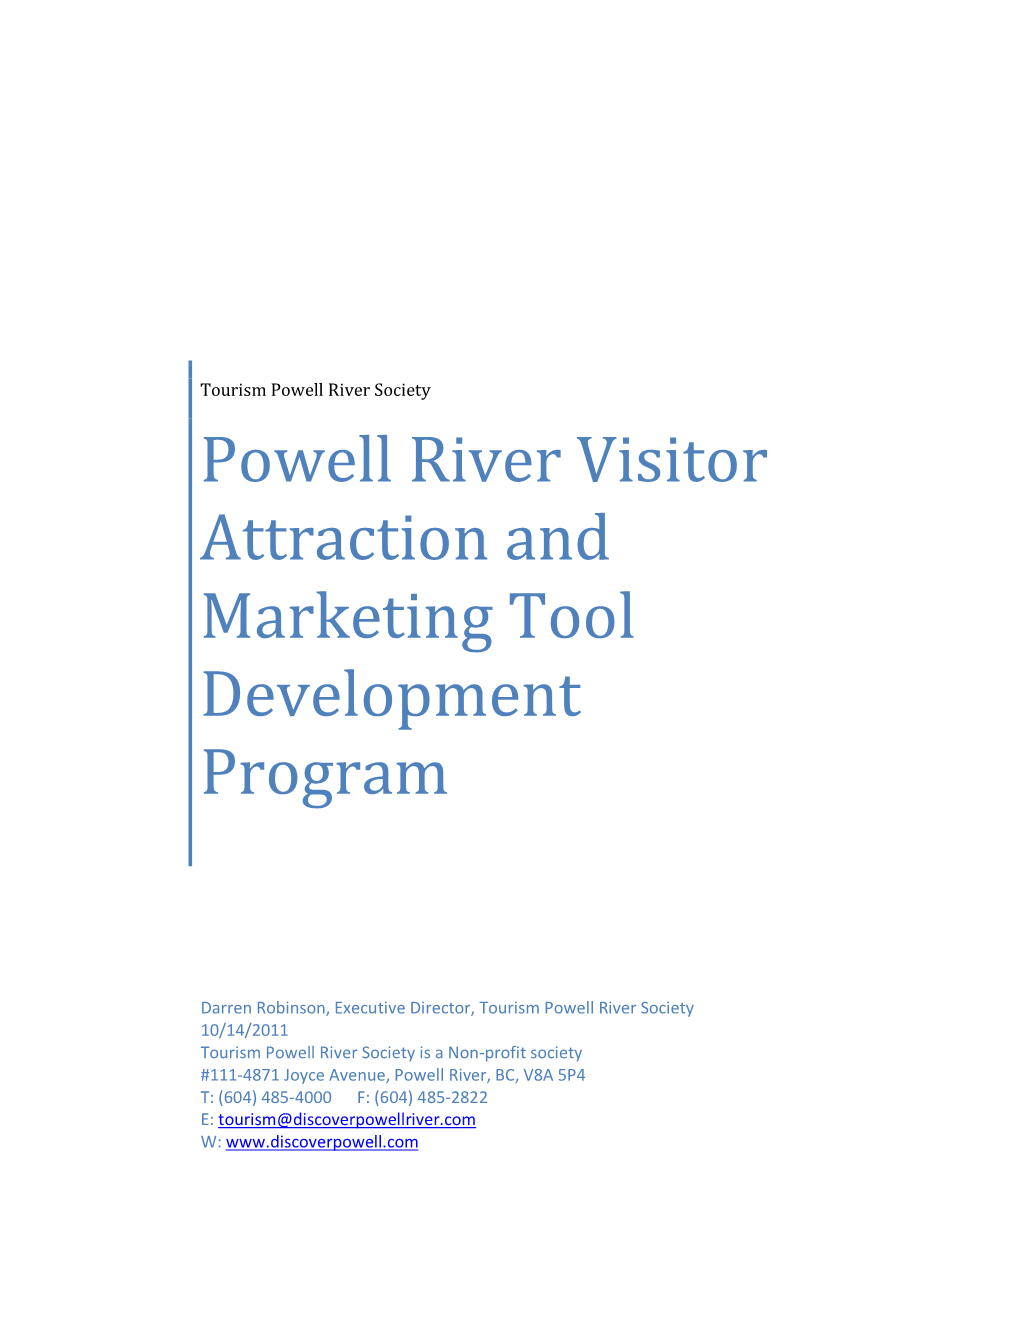 Powell River Visitor Attraction and Marketing Tool Development Program